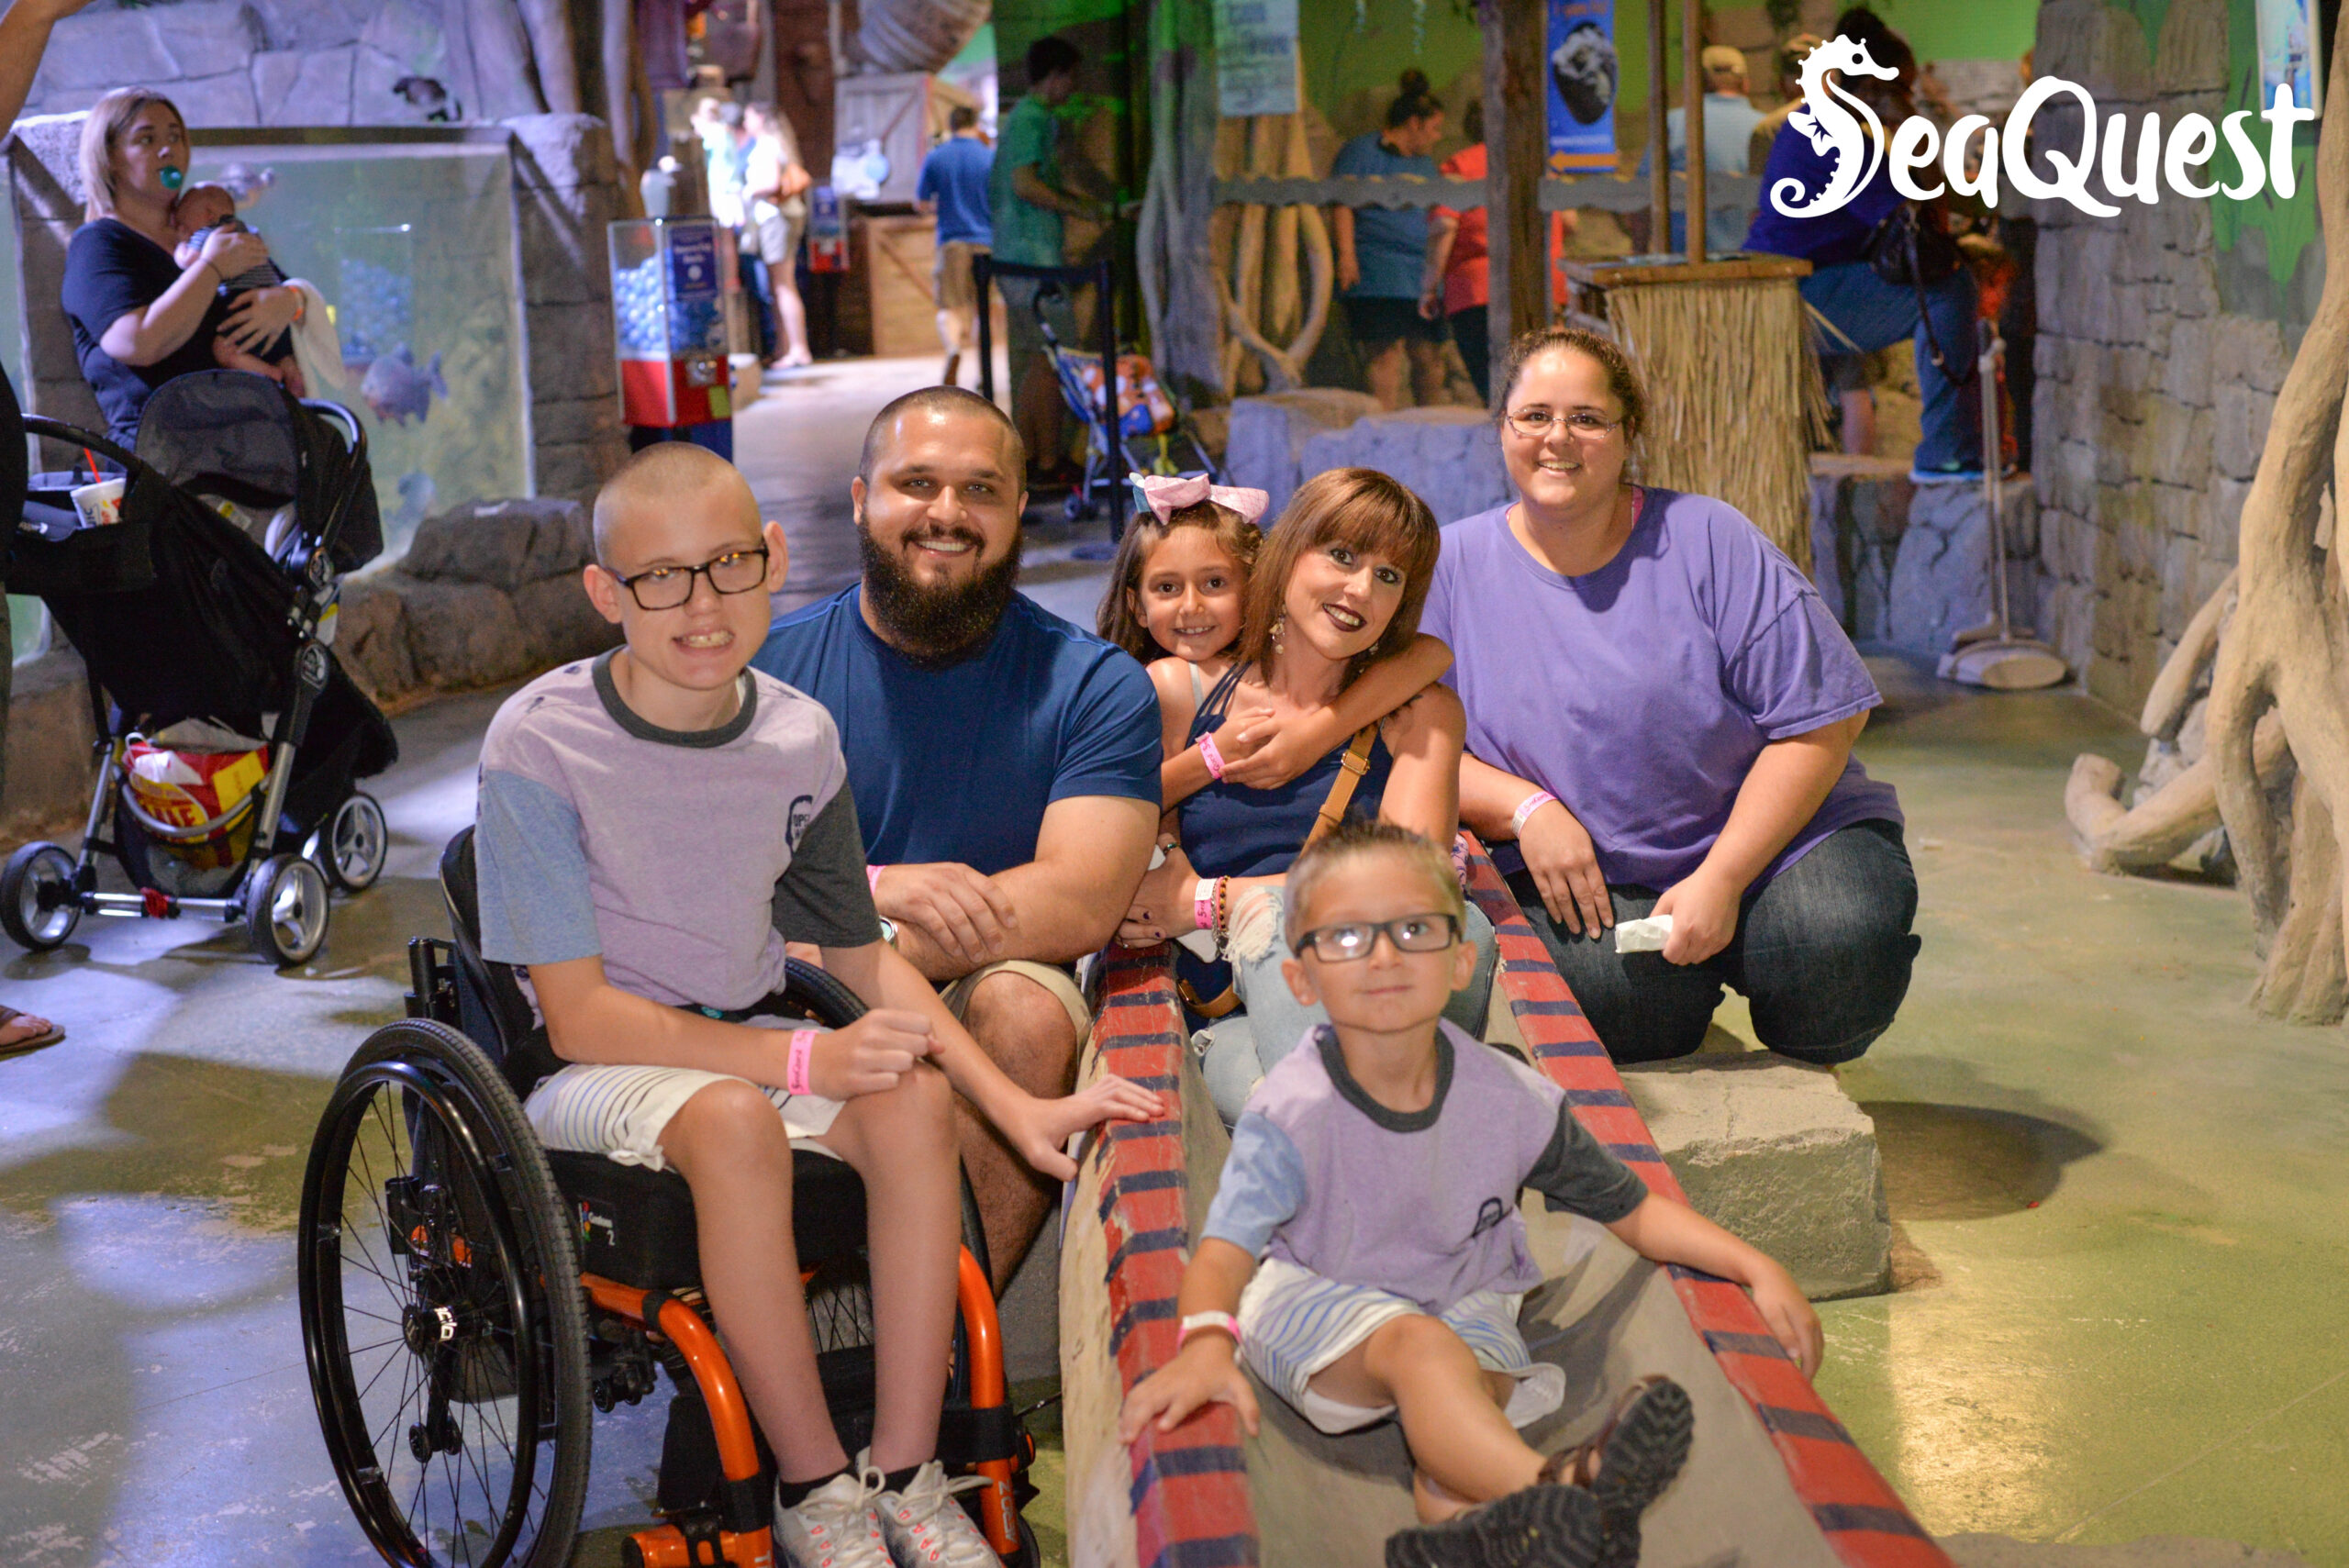 ADA Accessible Family at SeaQuest